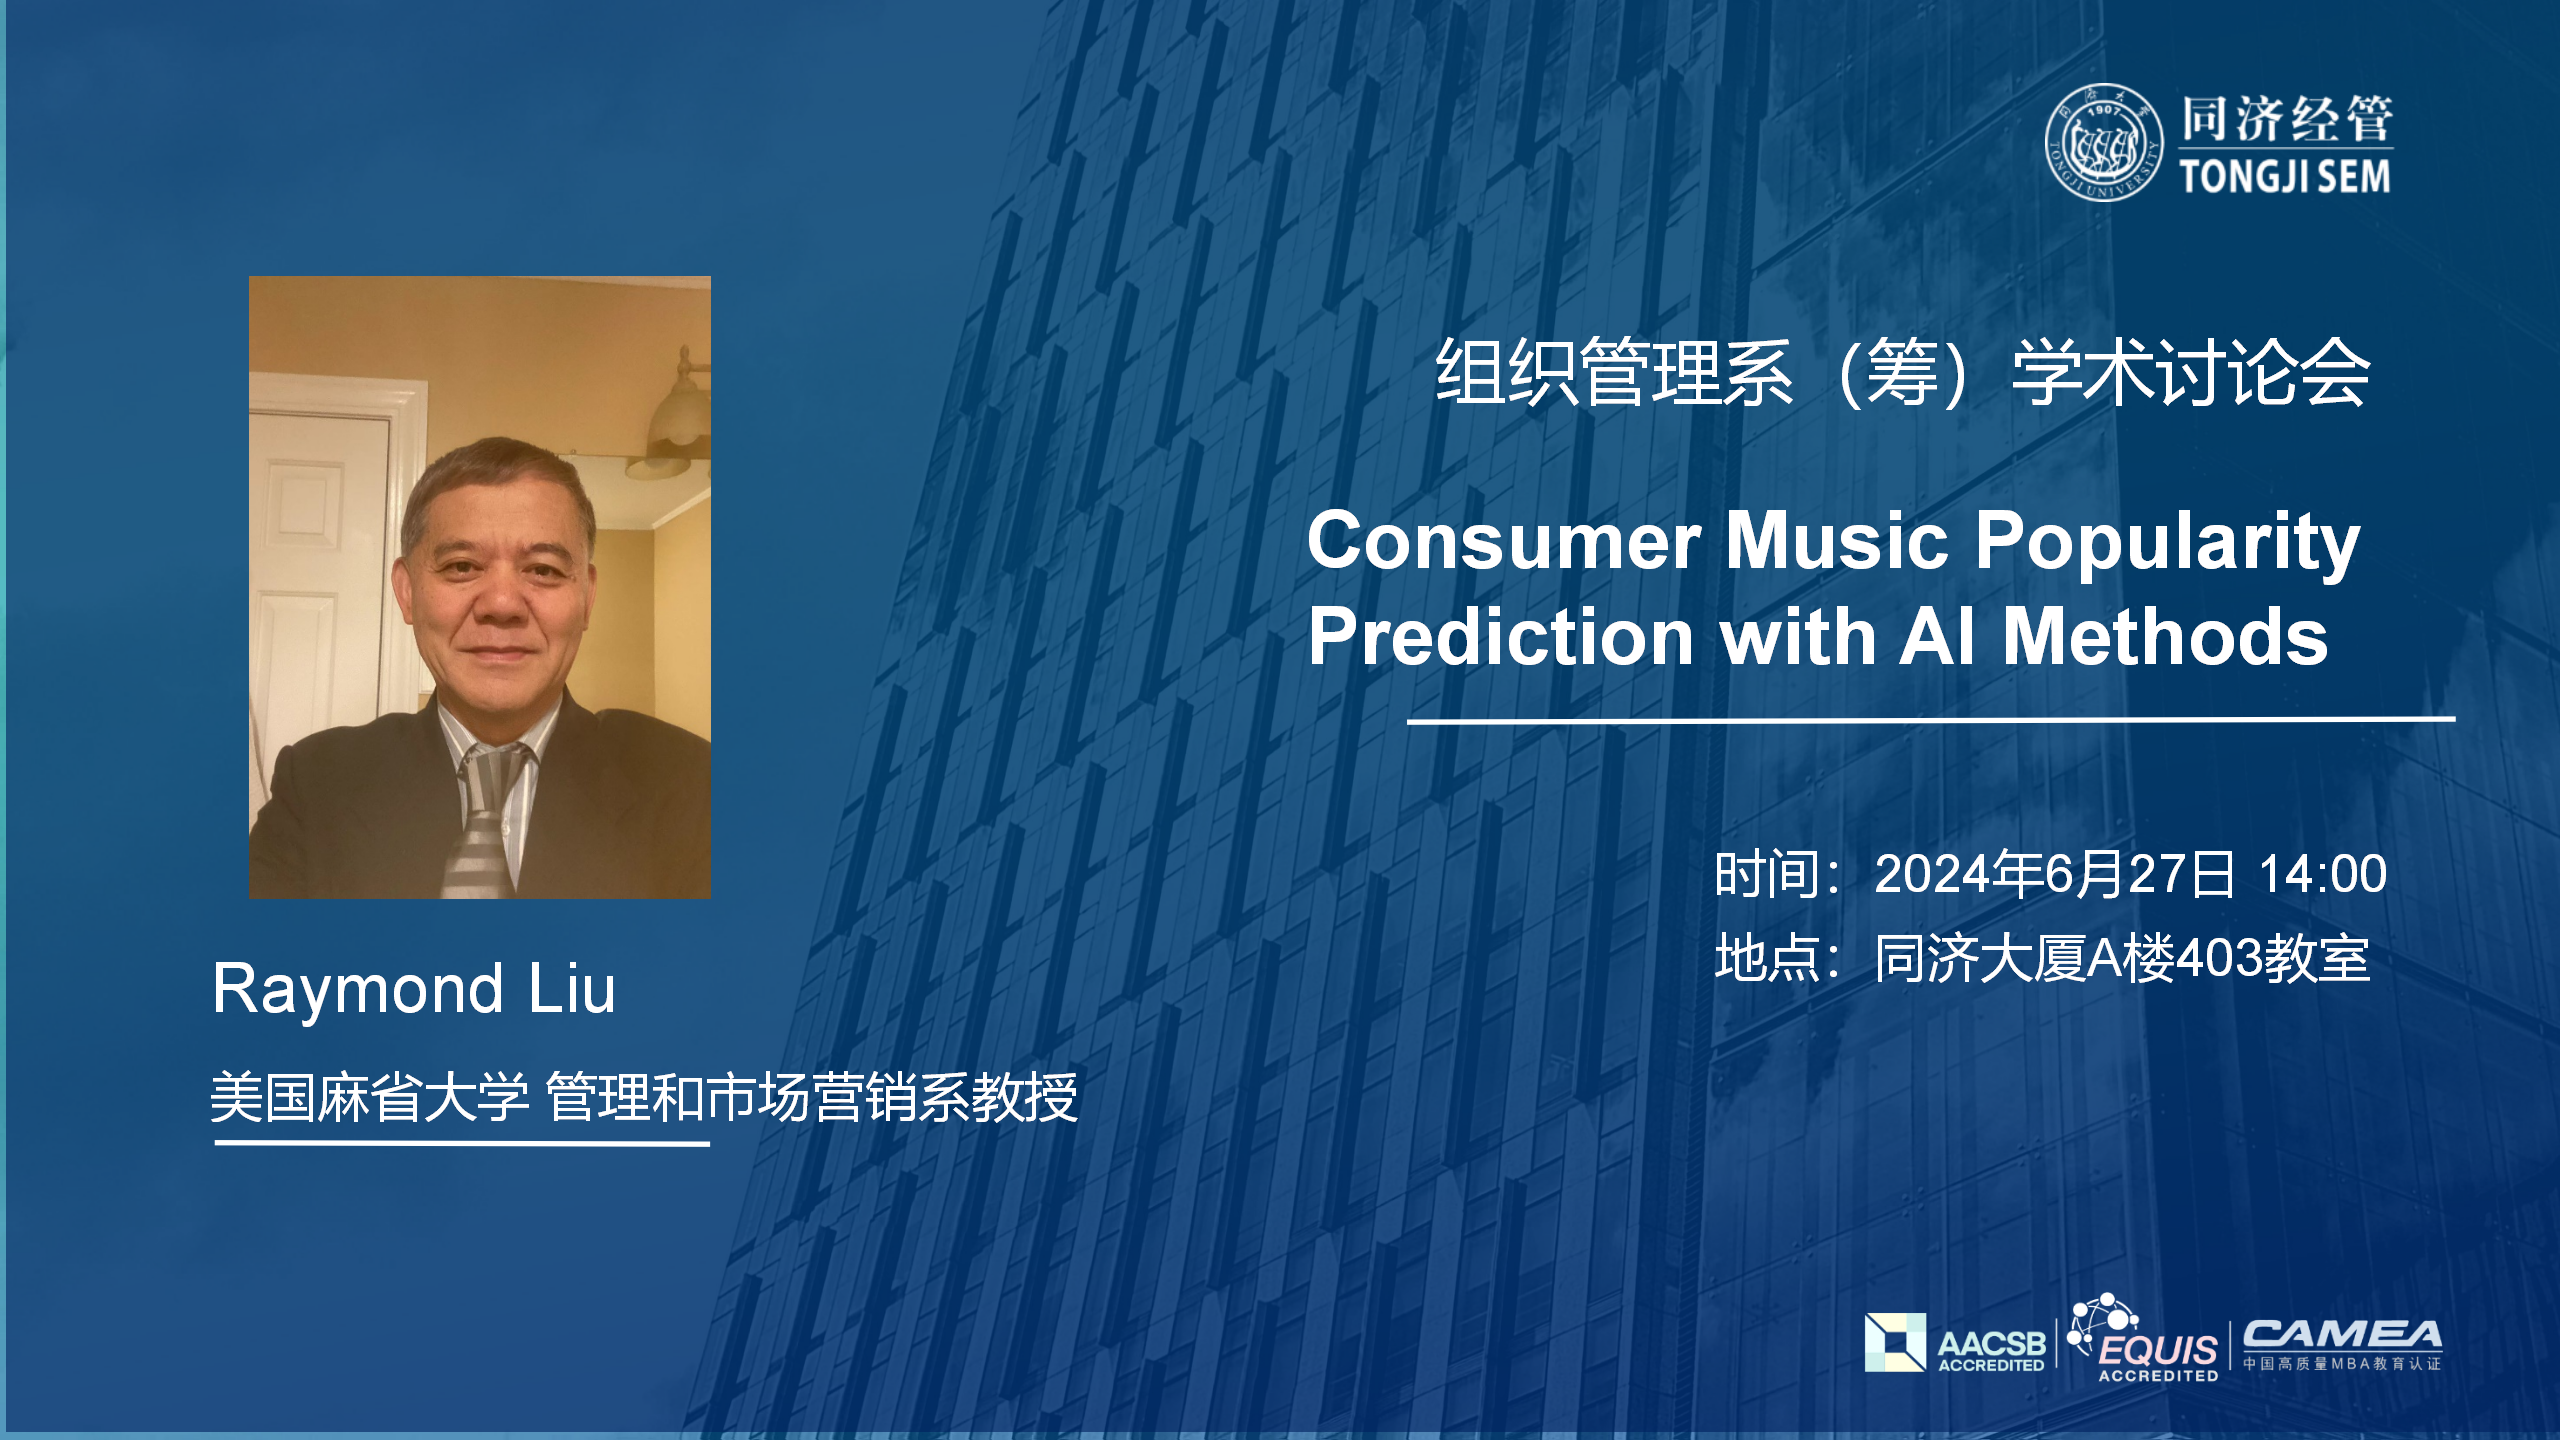 Consumer Music Popularity Prediction with AI Methods